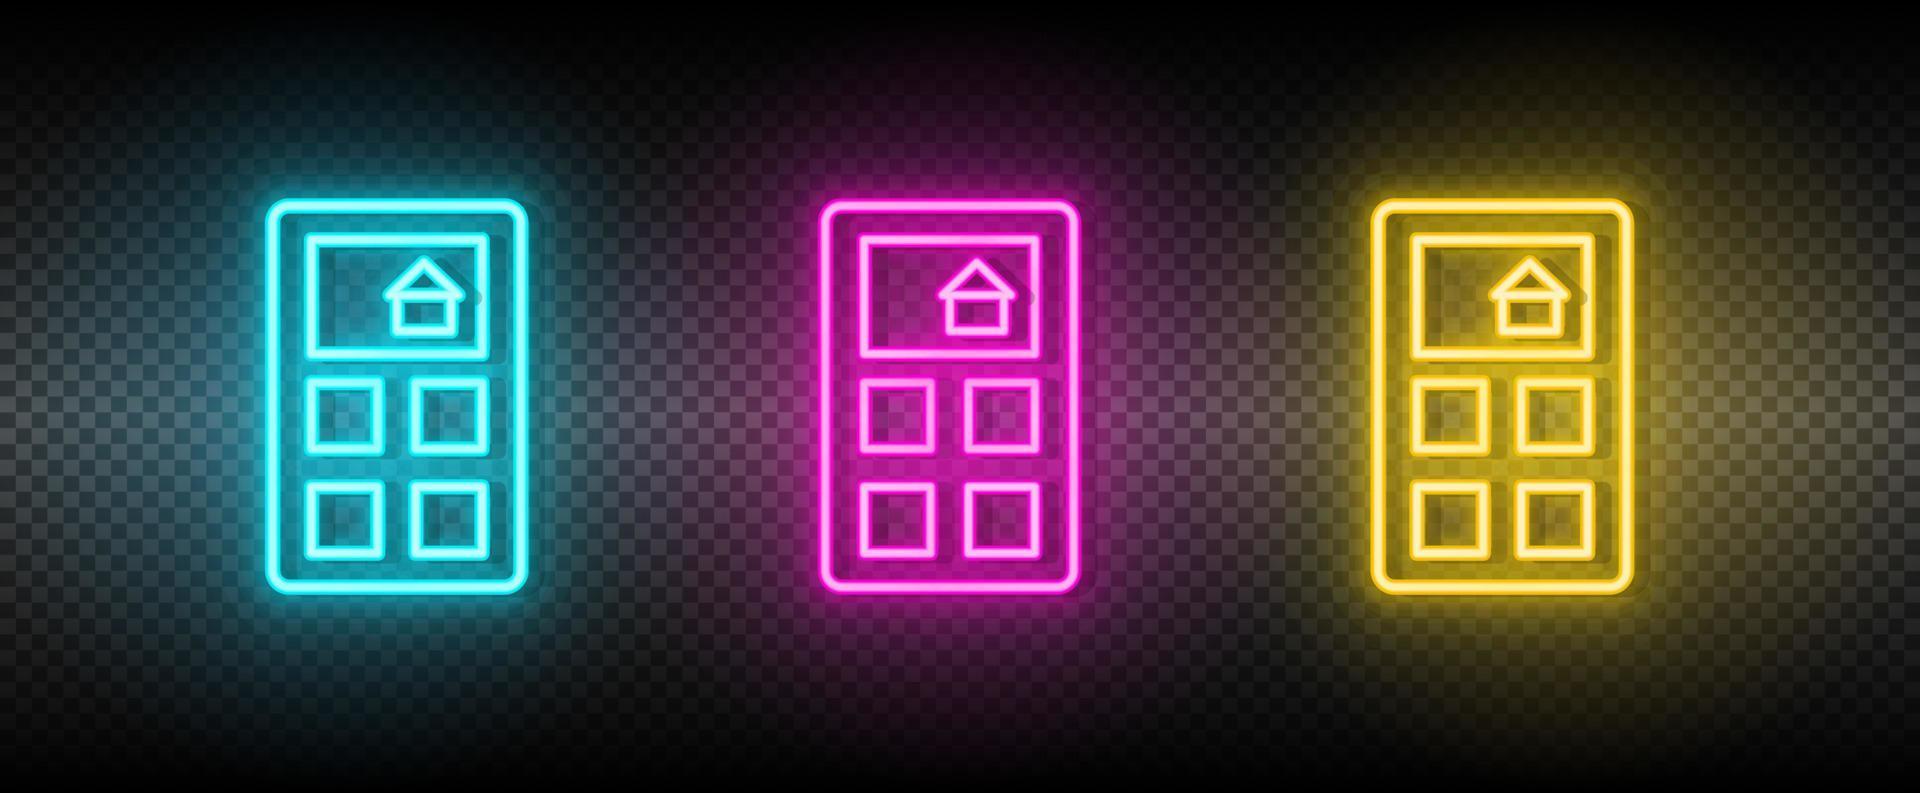 Real estate vector calculate, house, price. Illustration neon blue, yellow, red icon set